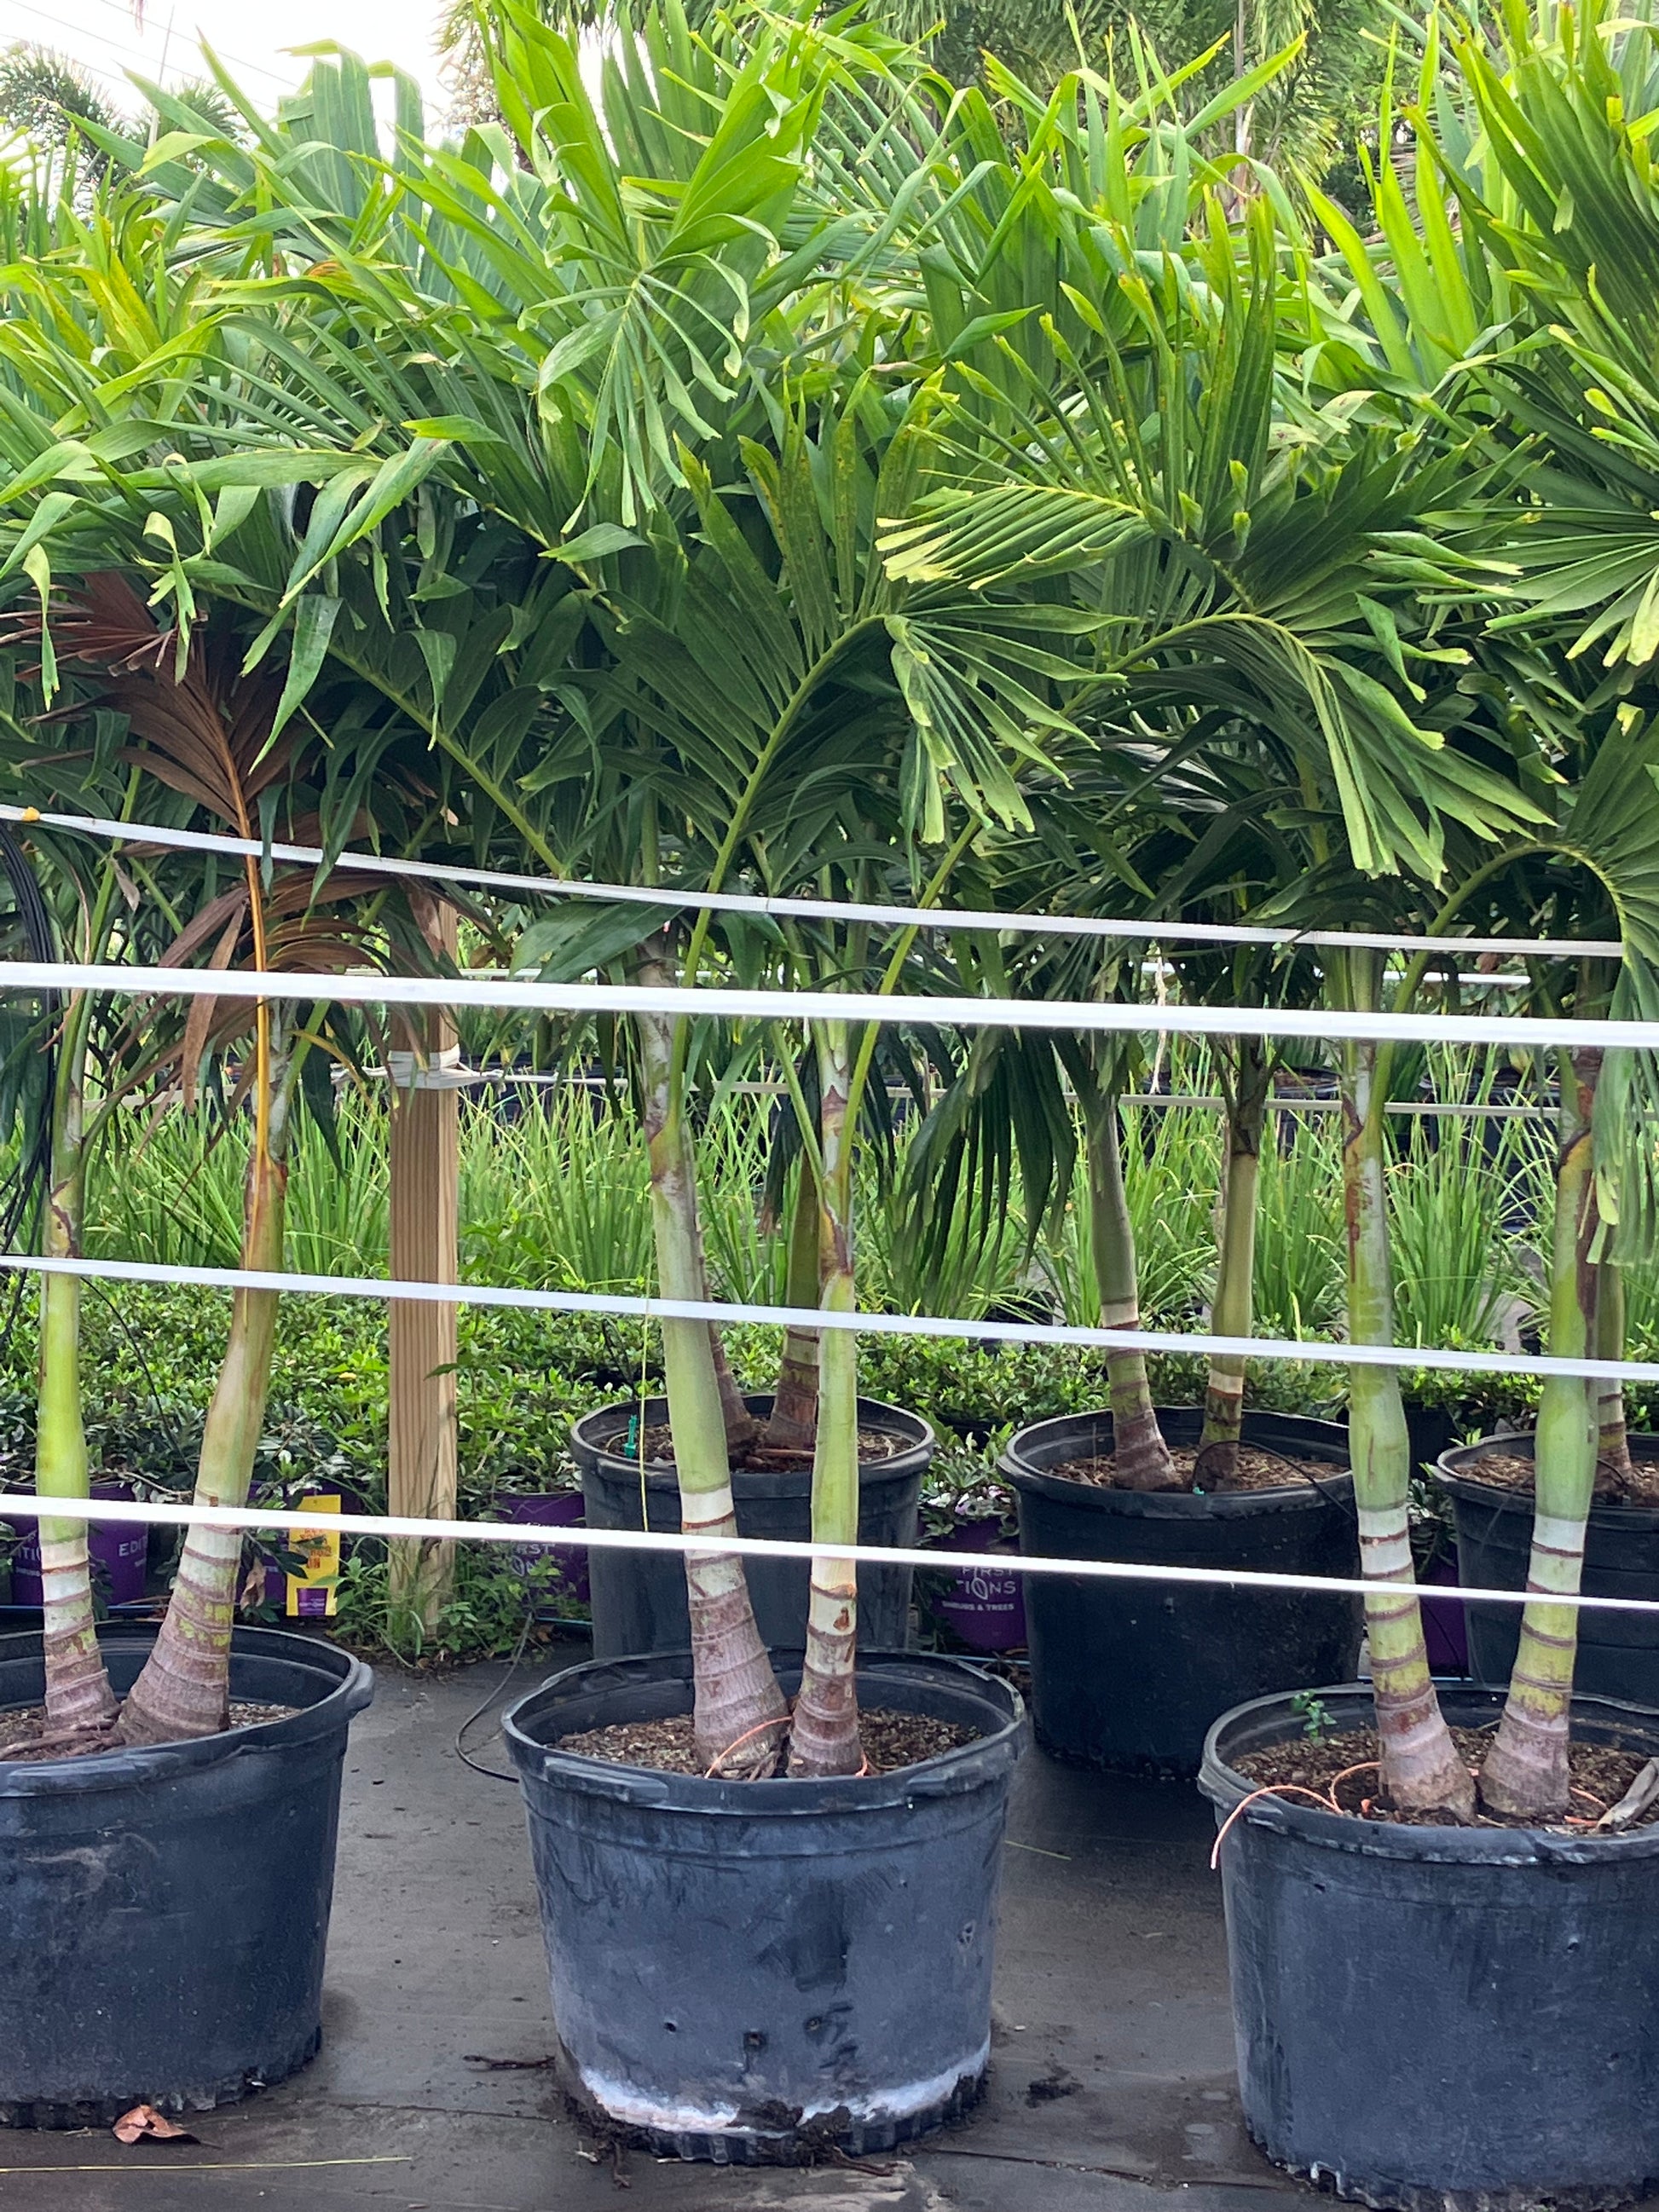 30 Gallon double trunk Adonidia How to choose the correct size Adonidia or Christmas Palm Tree, height, width, and number of trunks are important to your landscaping project